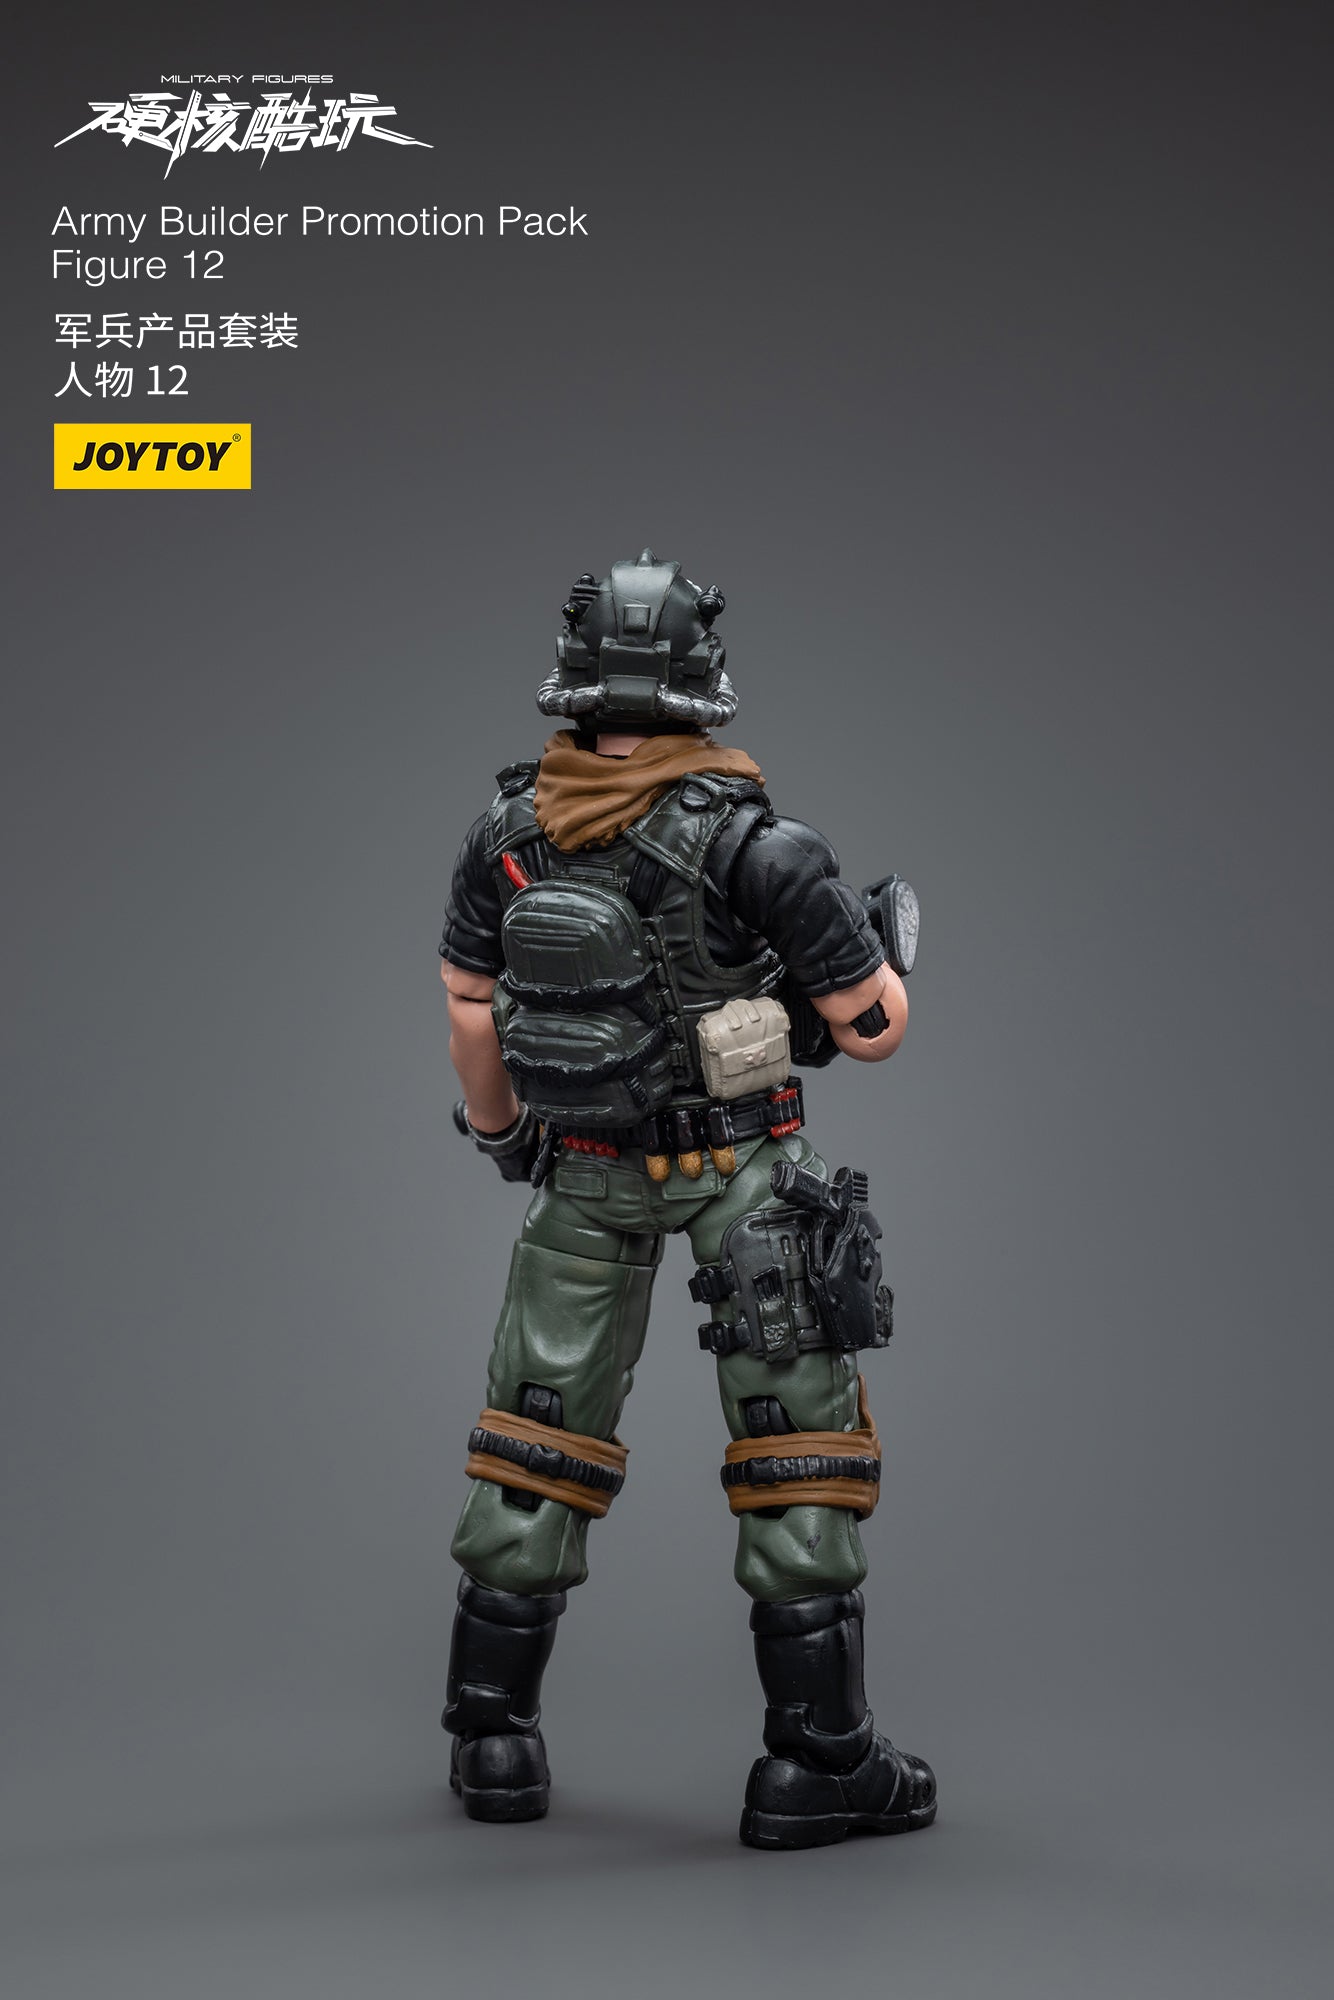 Army Builder Promotion Pack Figure 12 - Military Action Figure By JOYTOY